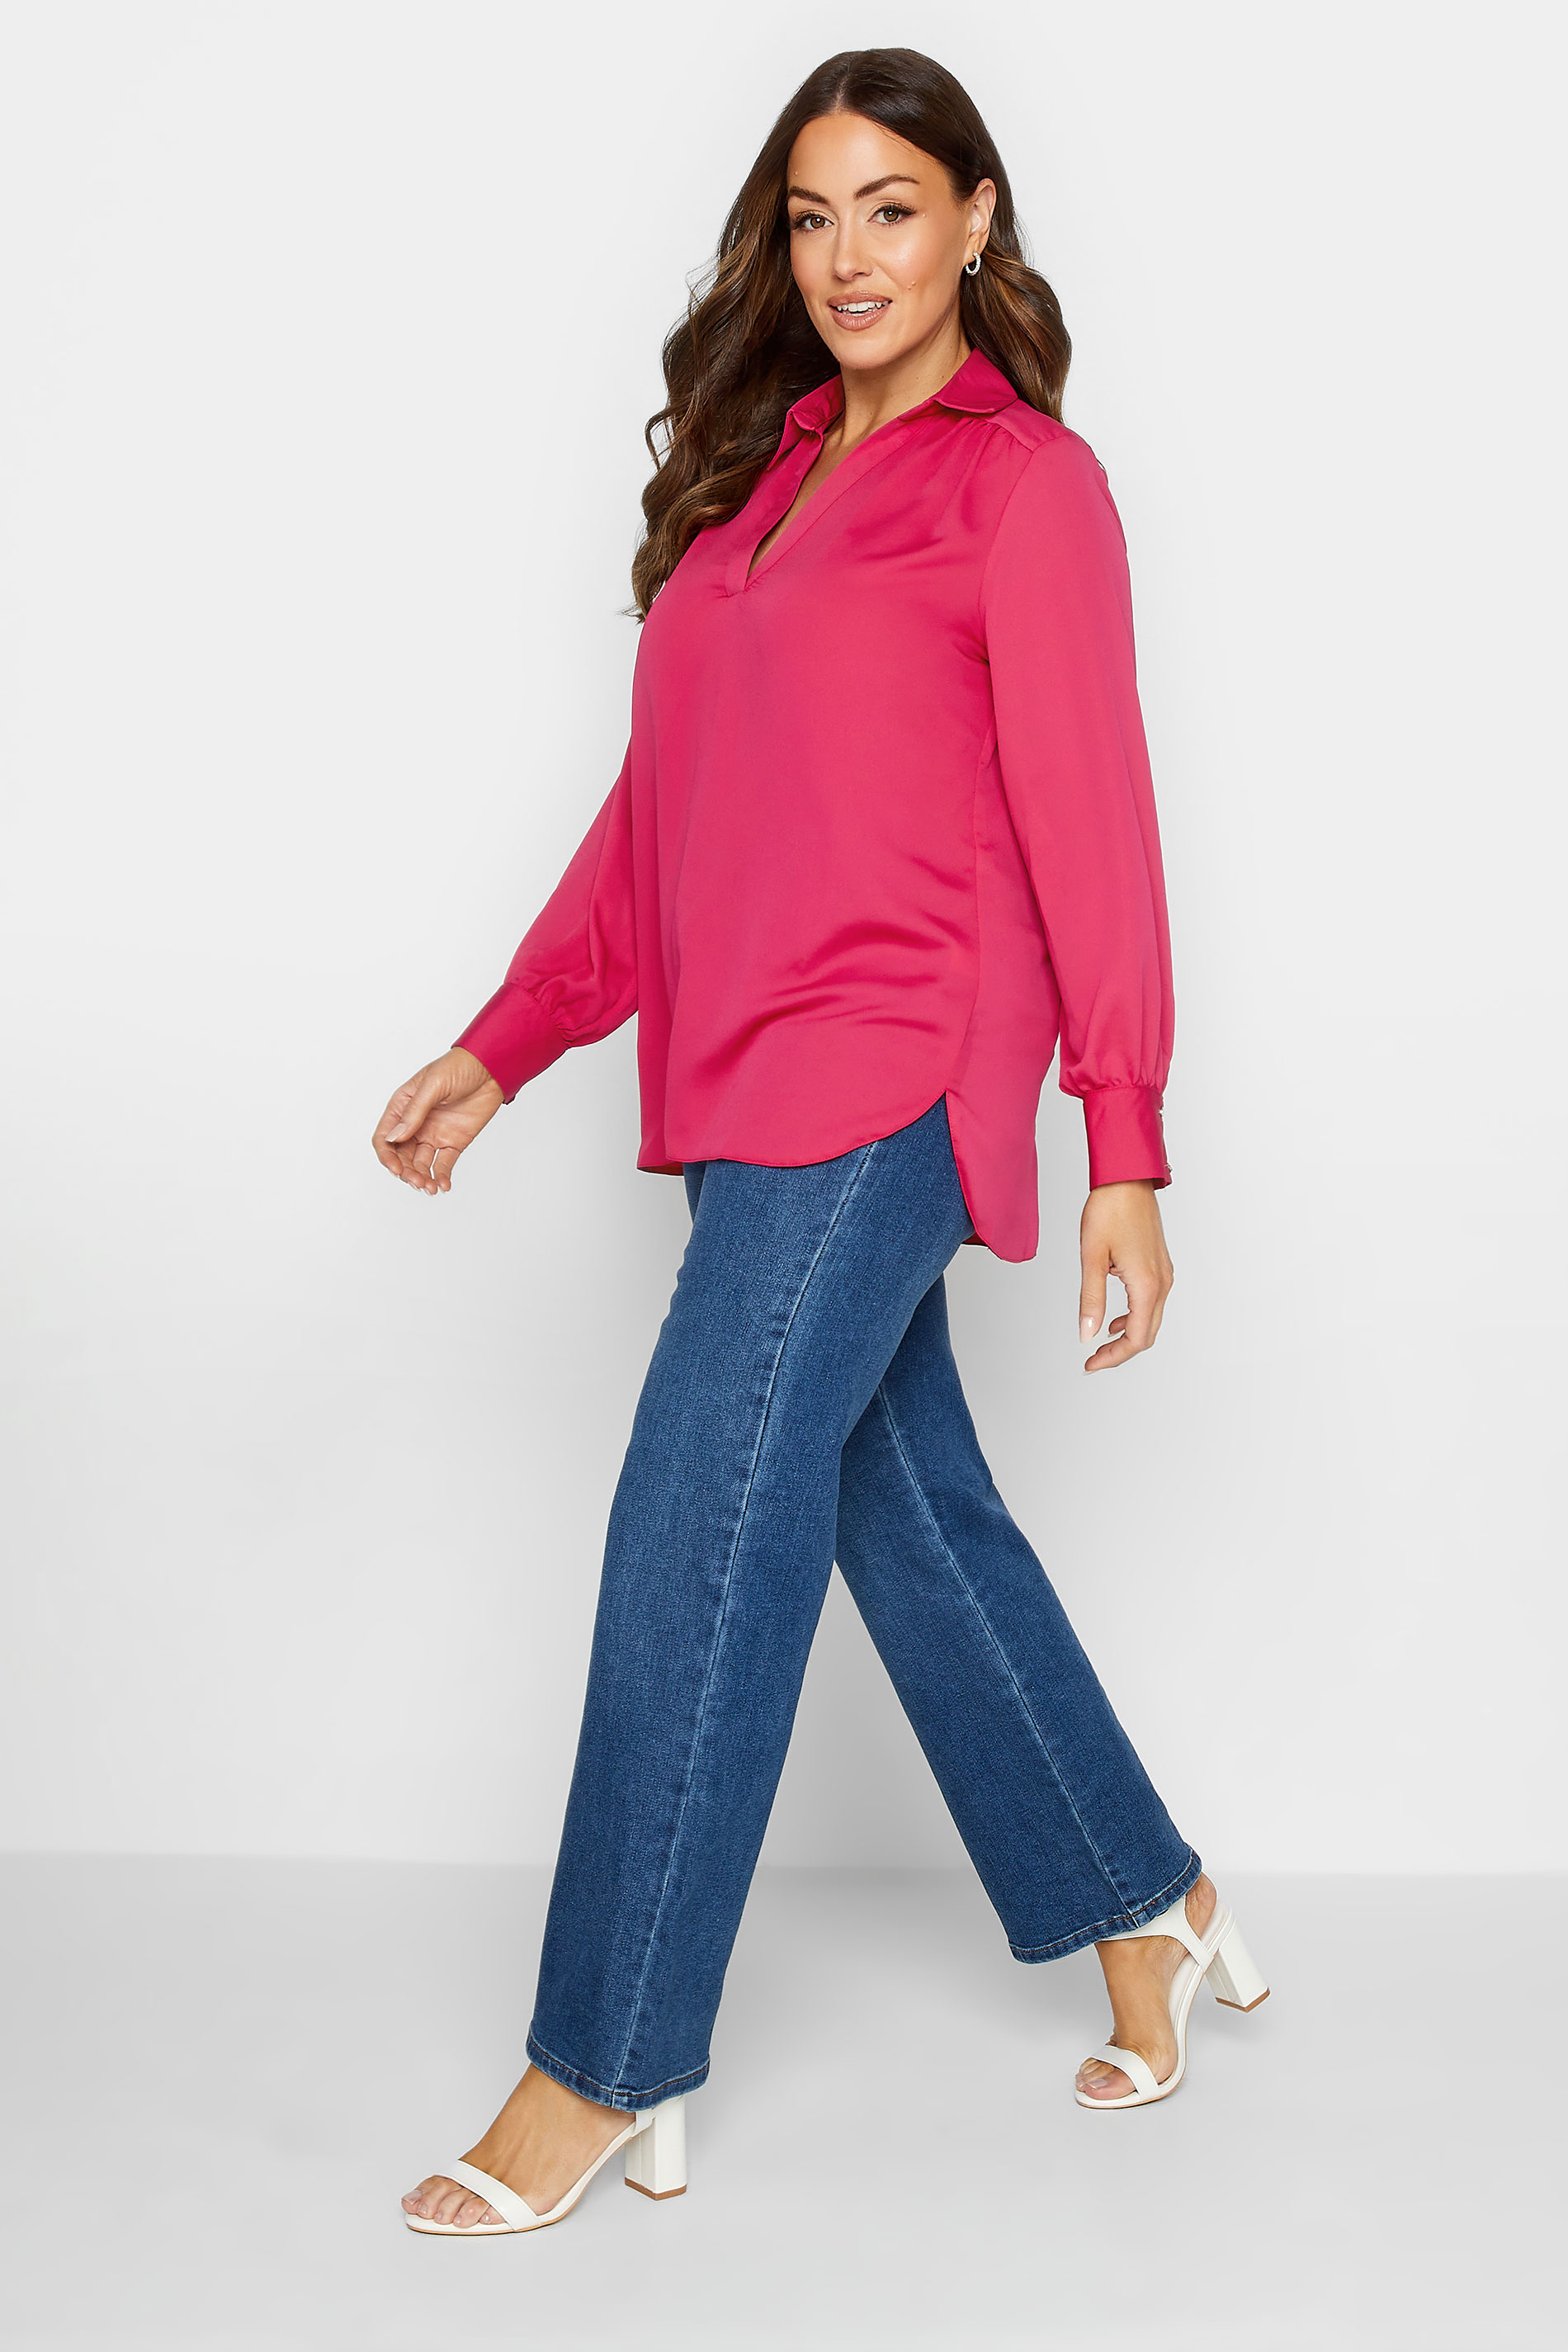 M&Co Hot Pink V-Neck Collared Blouse | M&Co 2